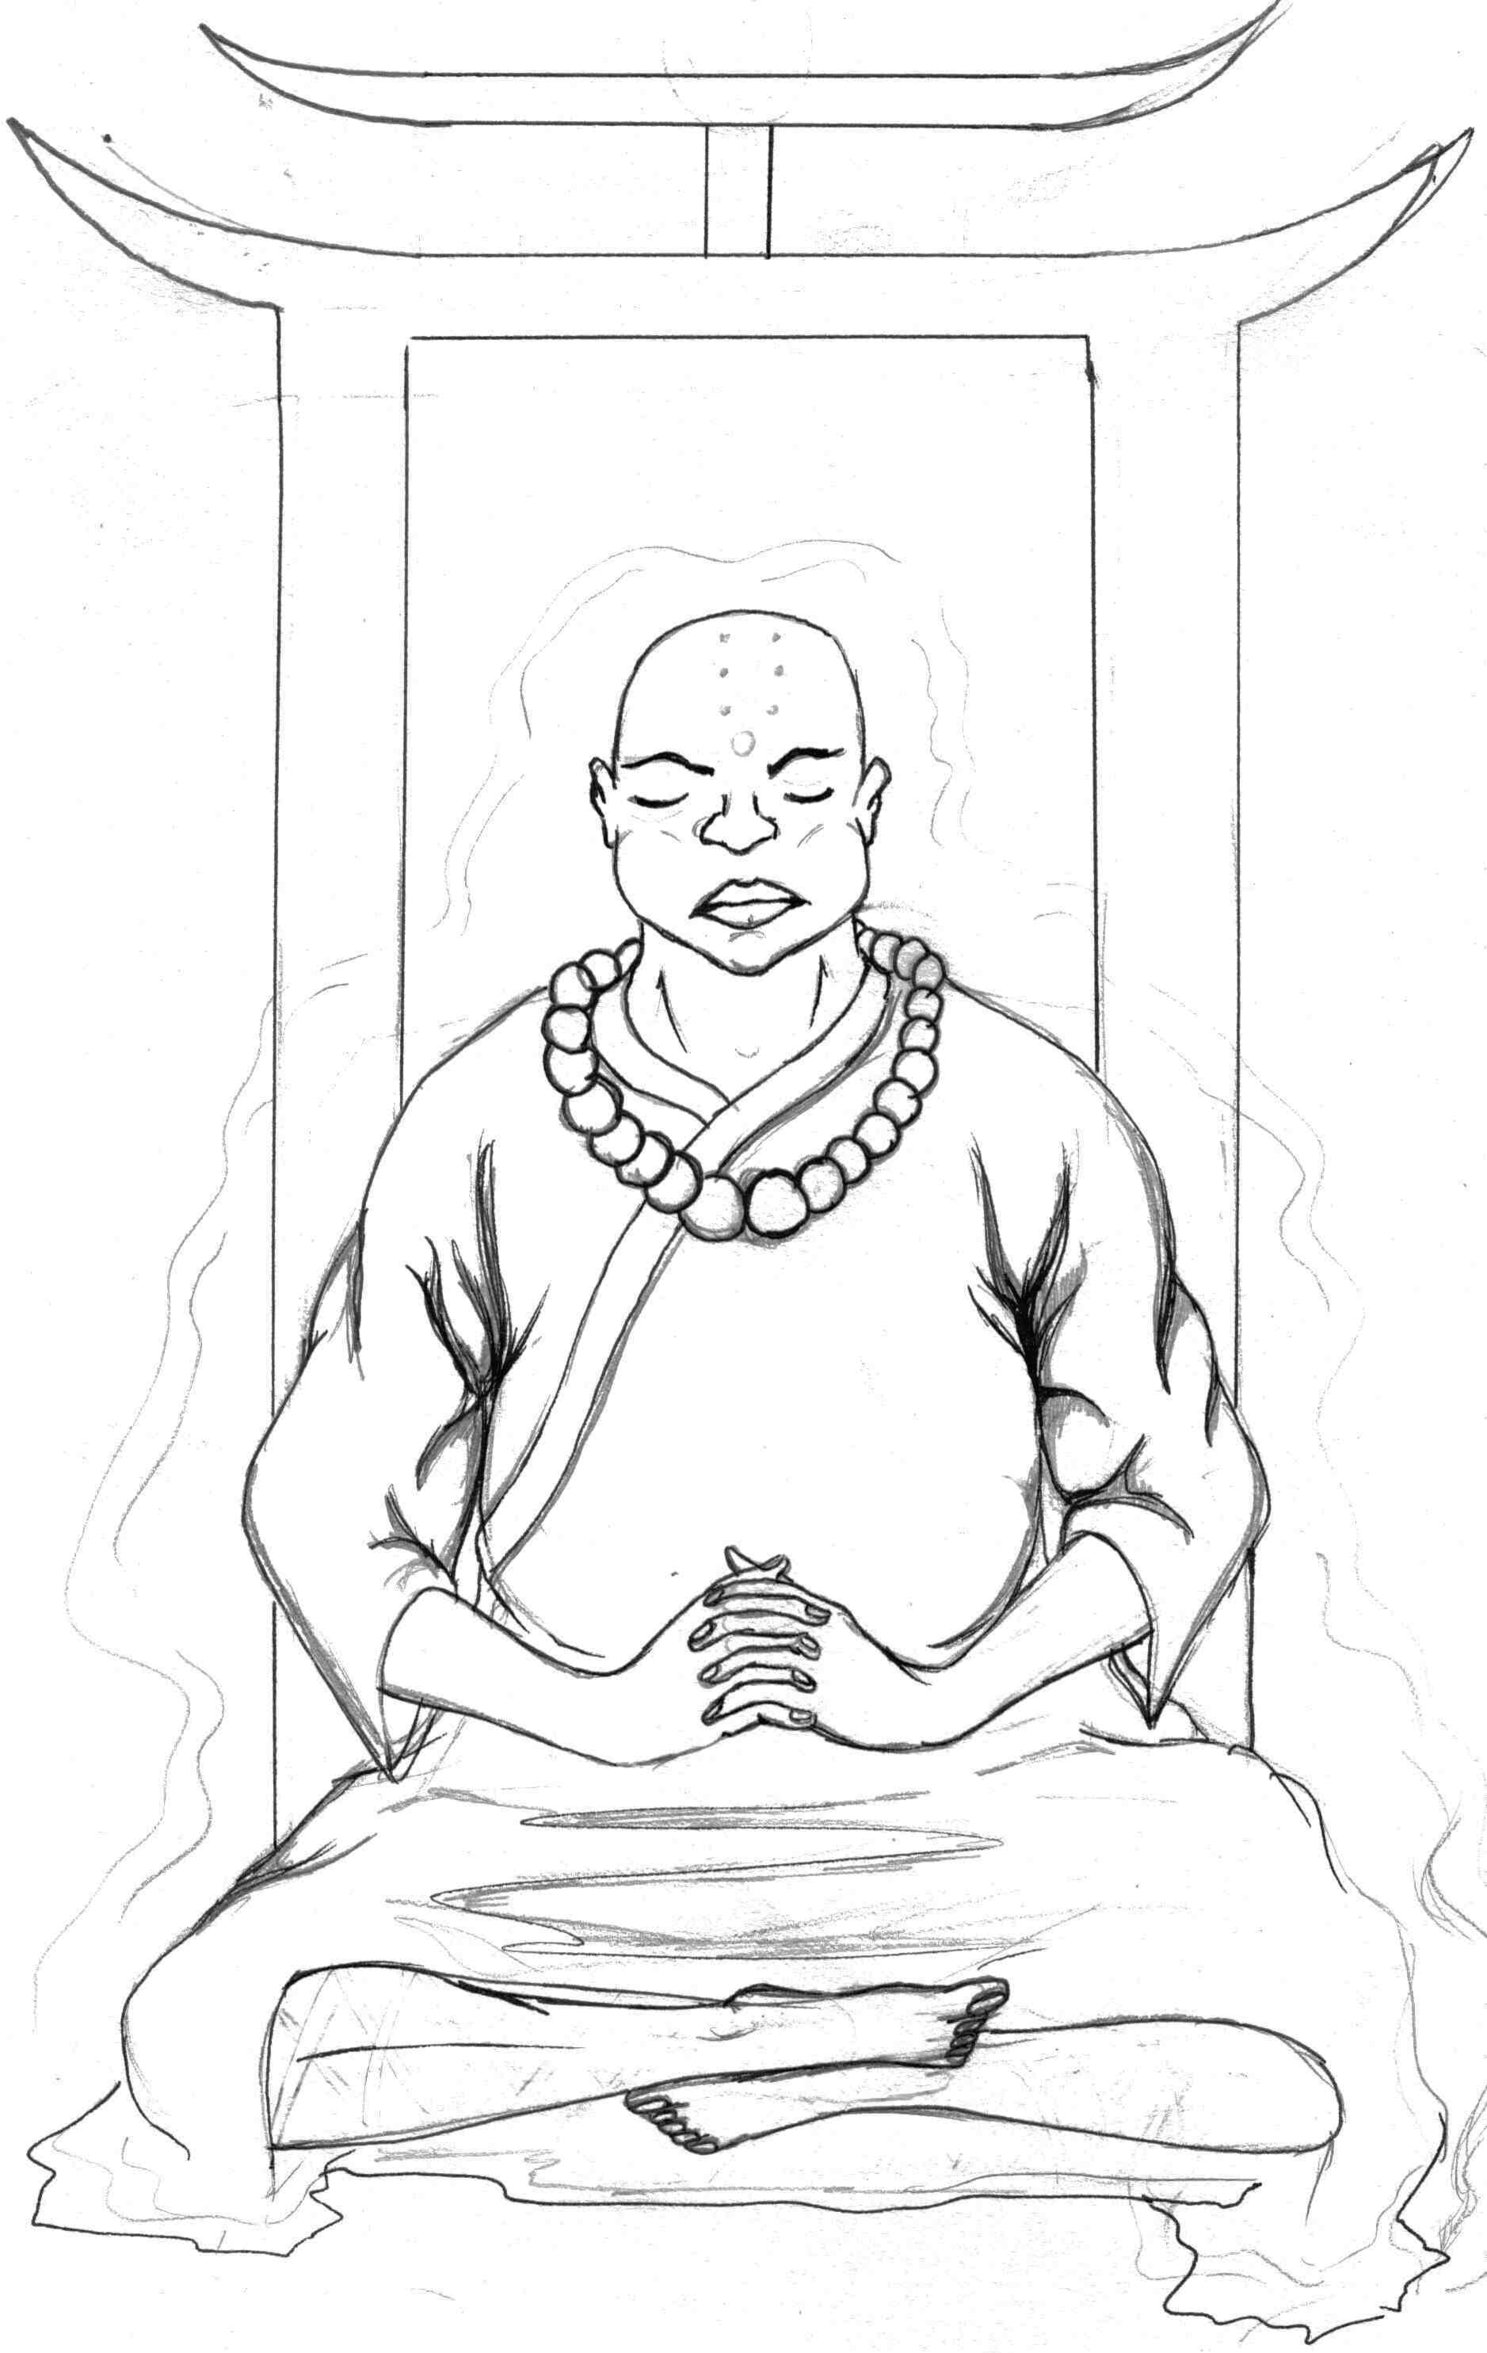 The best free Monk drawing images. Download from 152 free drawings of